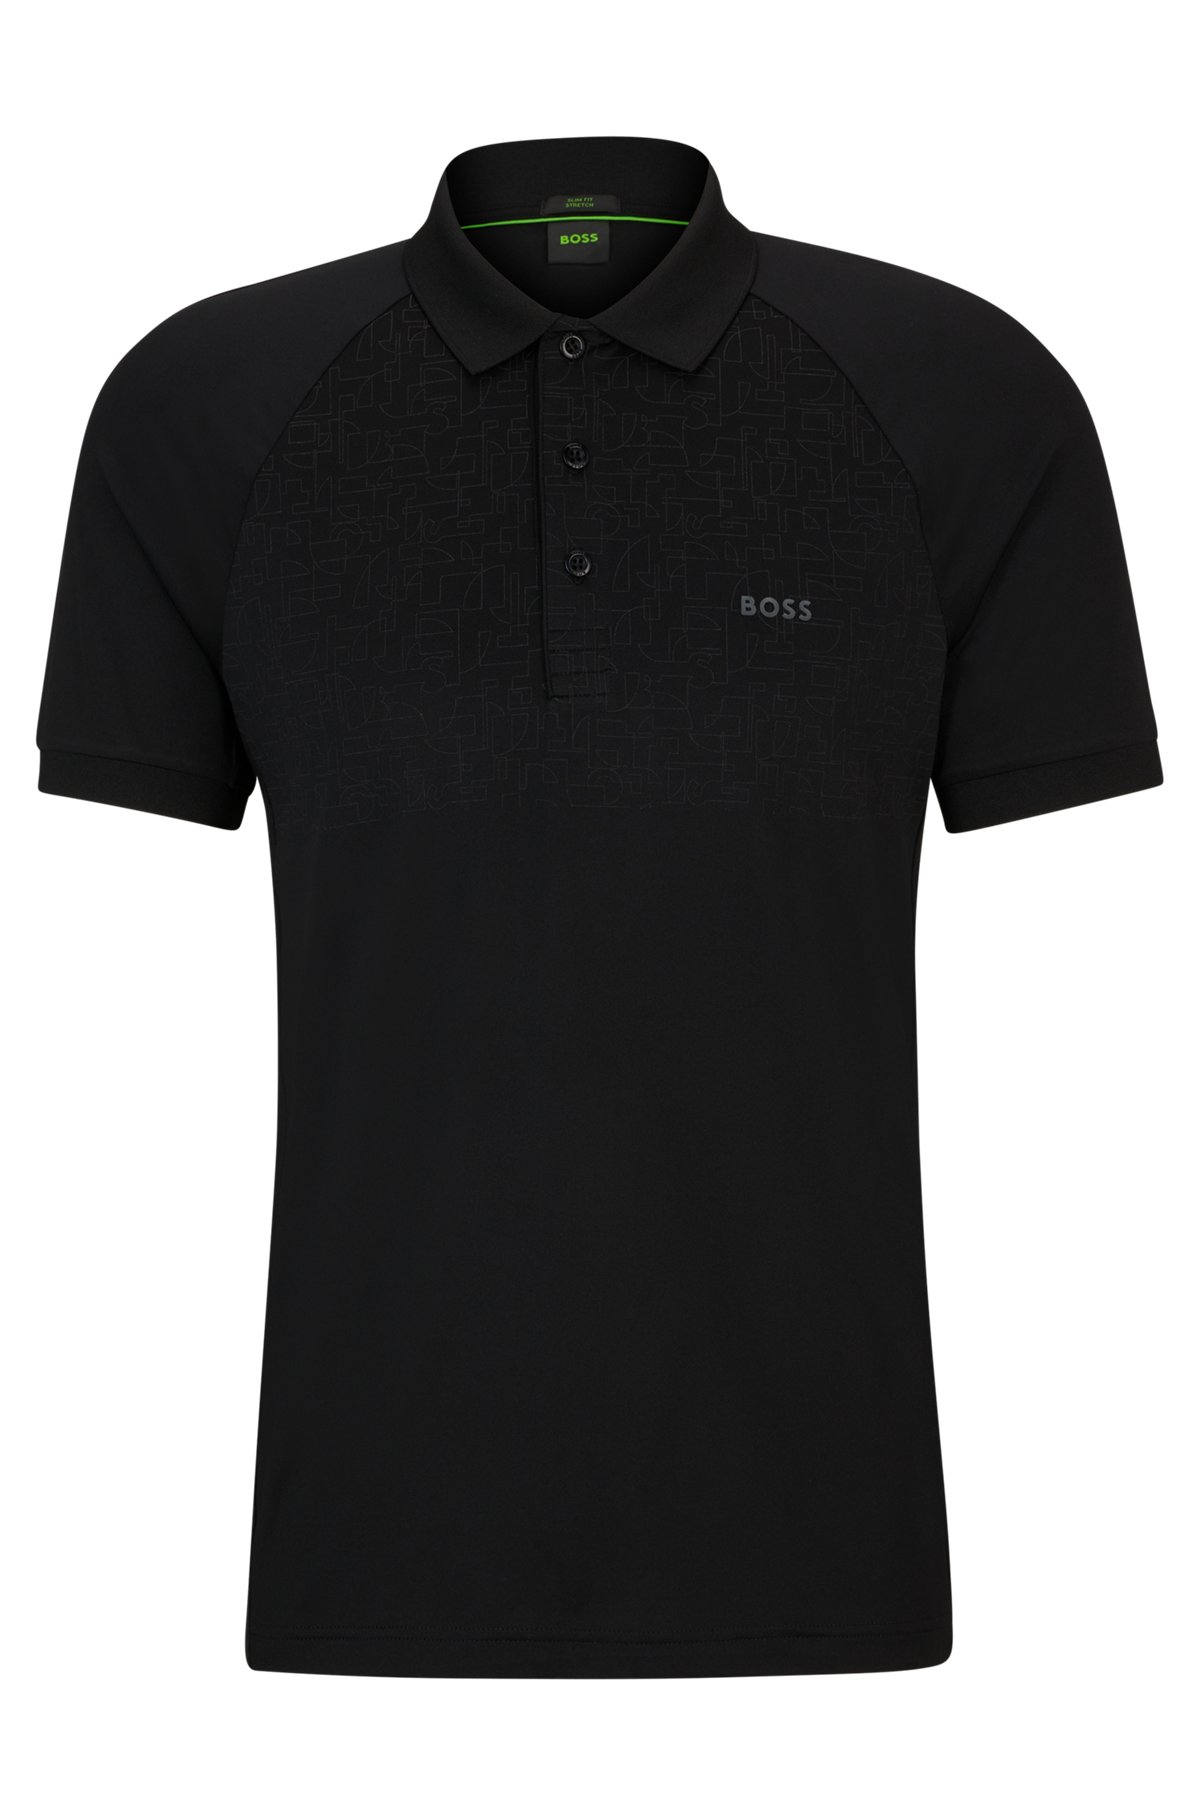 BOSS - Slim-fit polo shirt with decorative reflective pattern